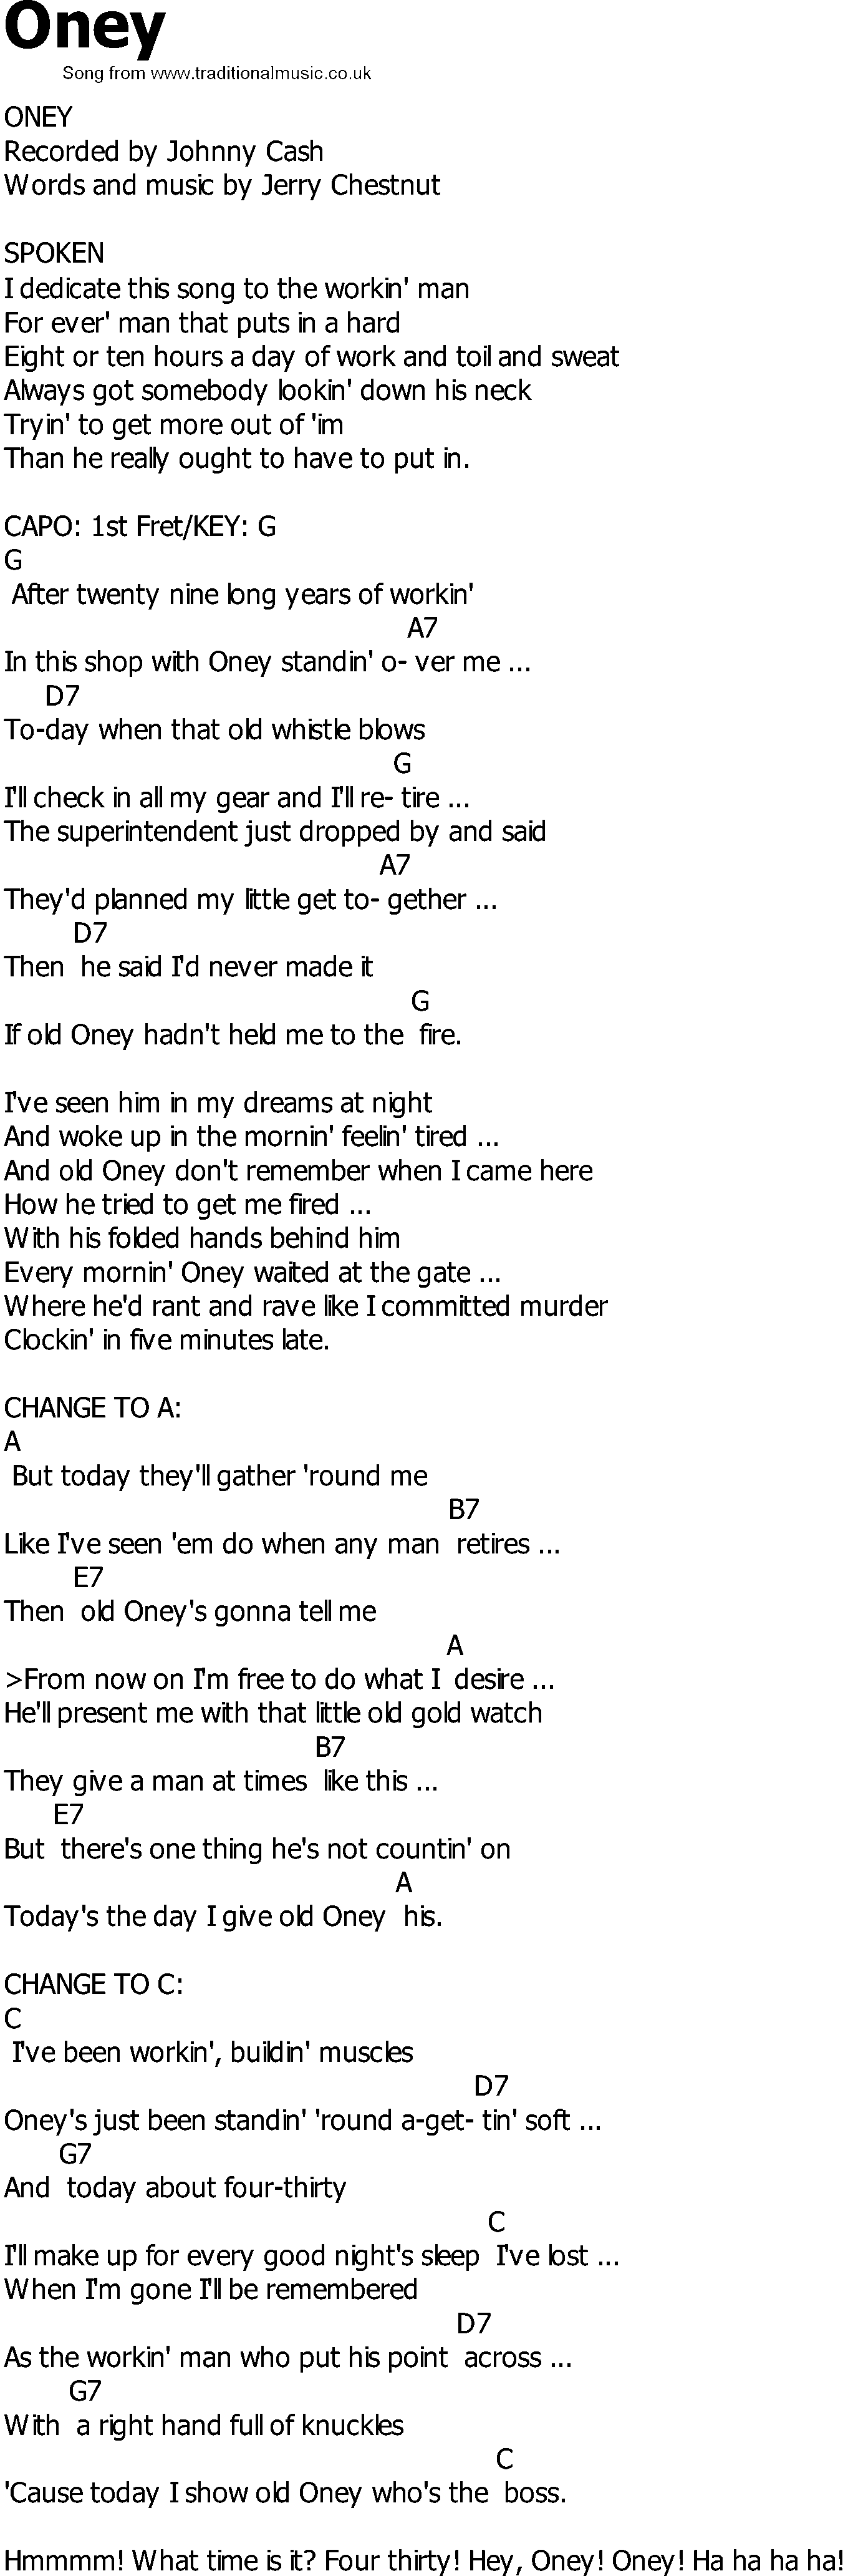 Old Country song lyrics with chords - Oney